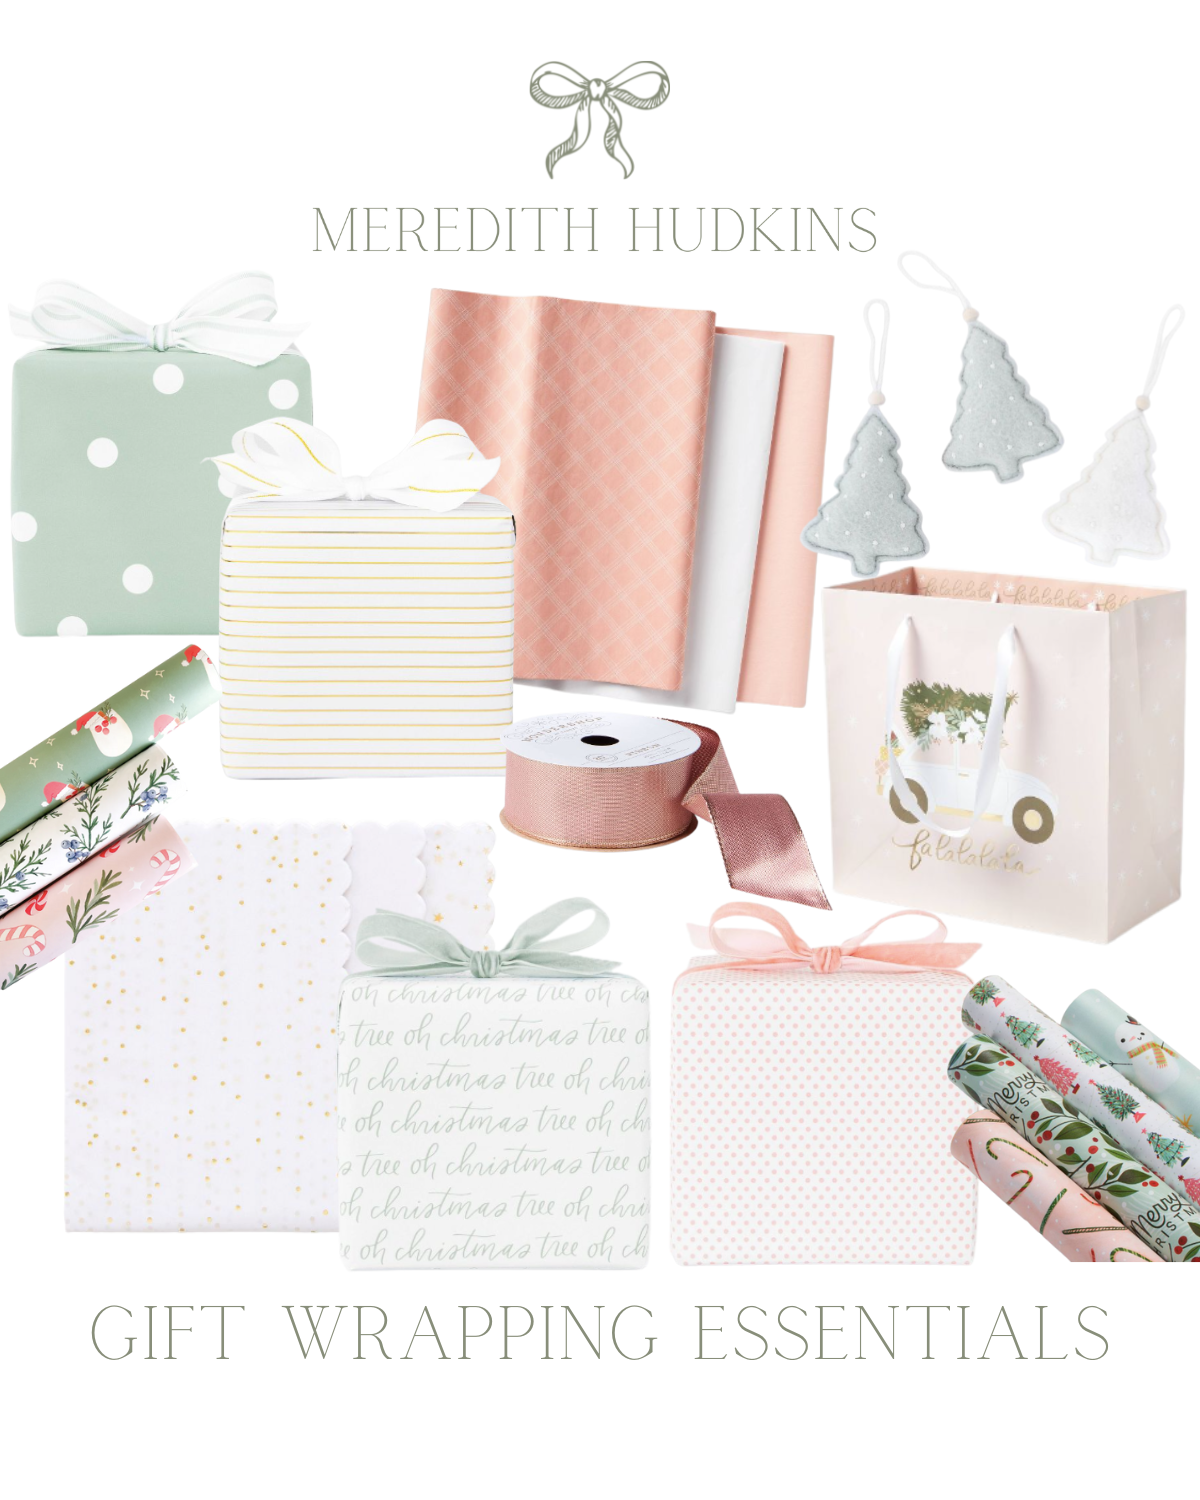 Pink Christmas Wrapping Paper